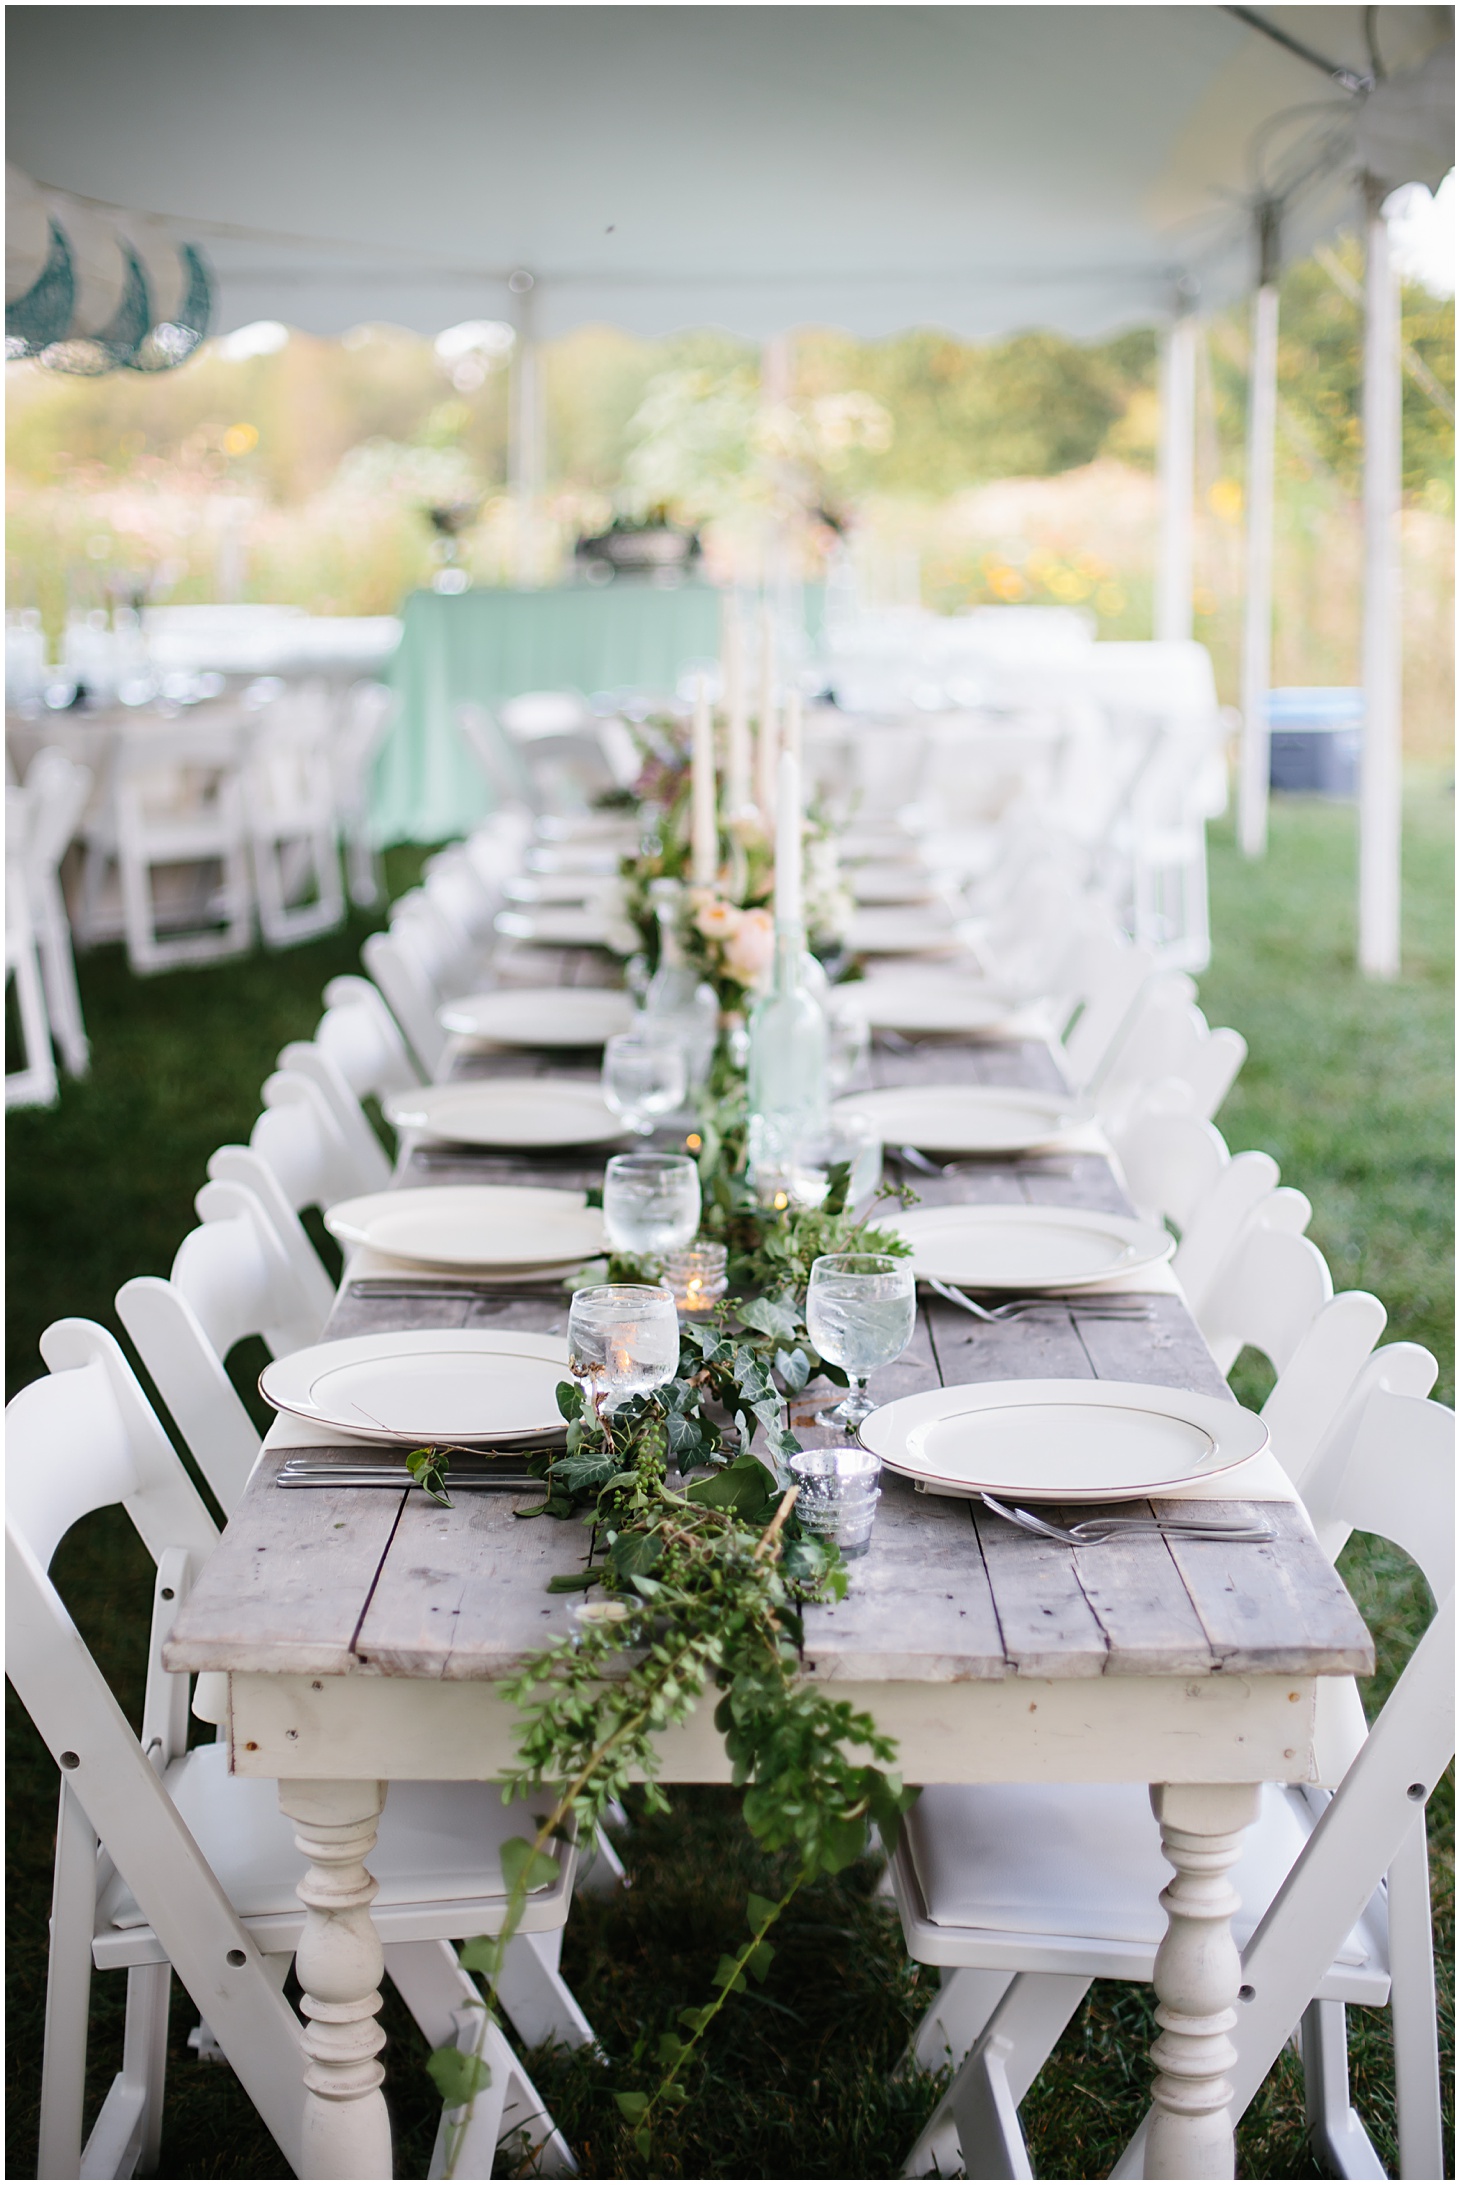 Rustic Floral Wedding at Rocklands Farm & Winery by Sarah Bradshaw Photography_0036